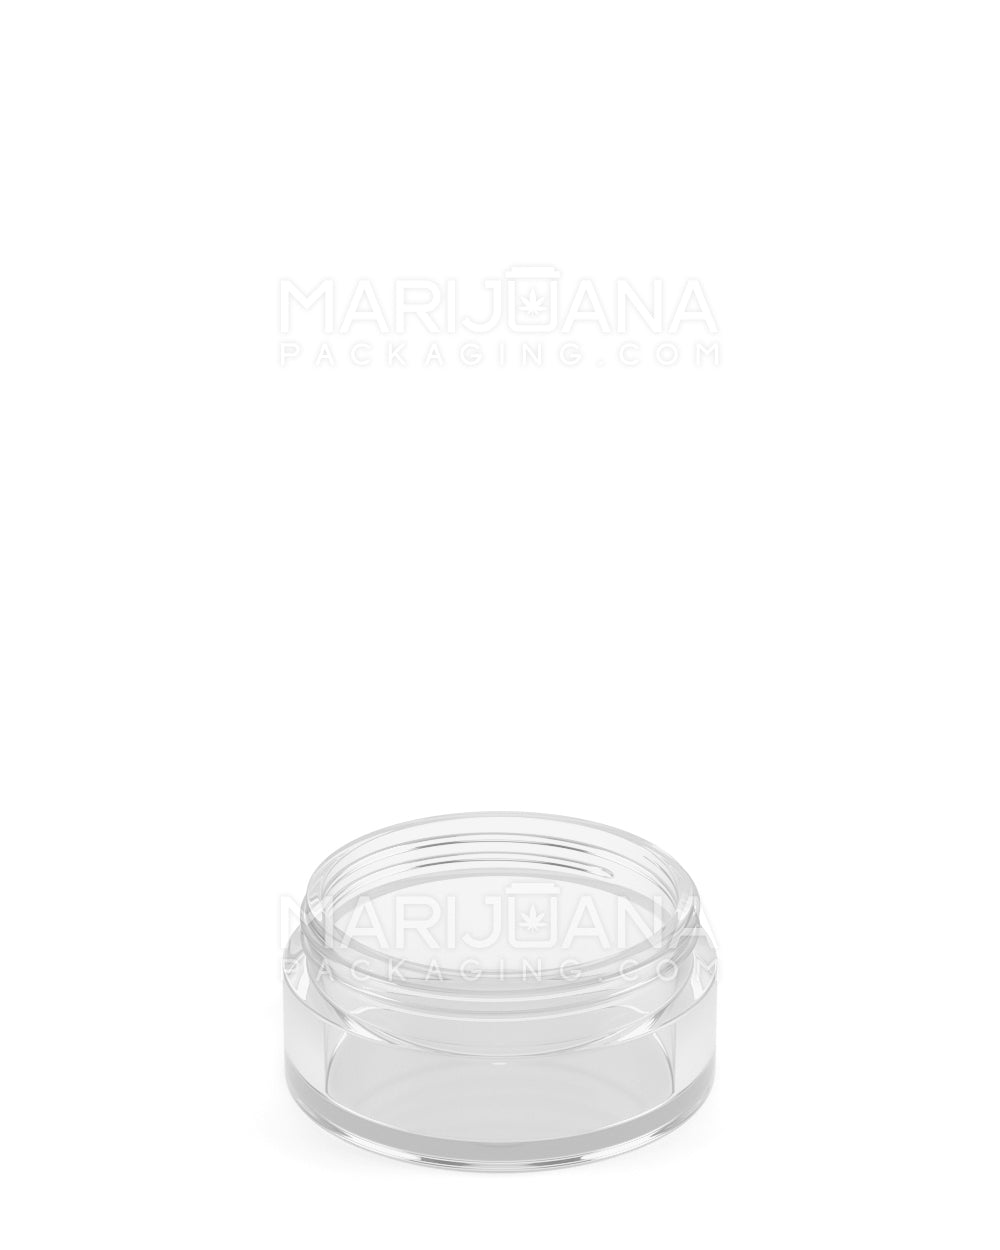 Clear Concentrate Containers w/ Screw Top Cap | 10mL - Plastic - 100 Count - 5